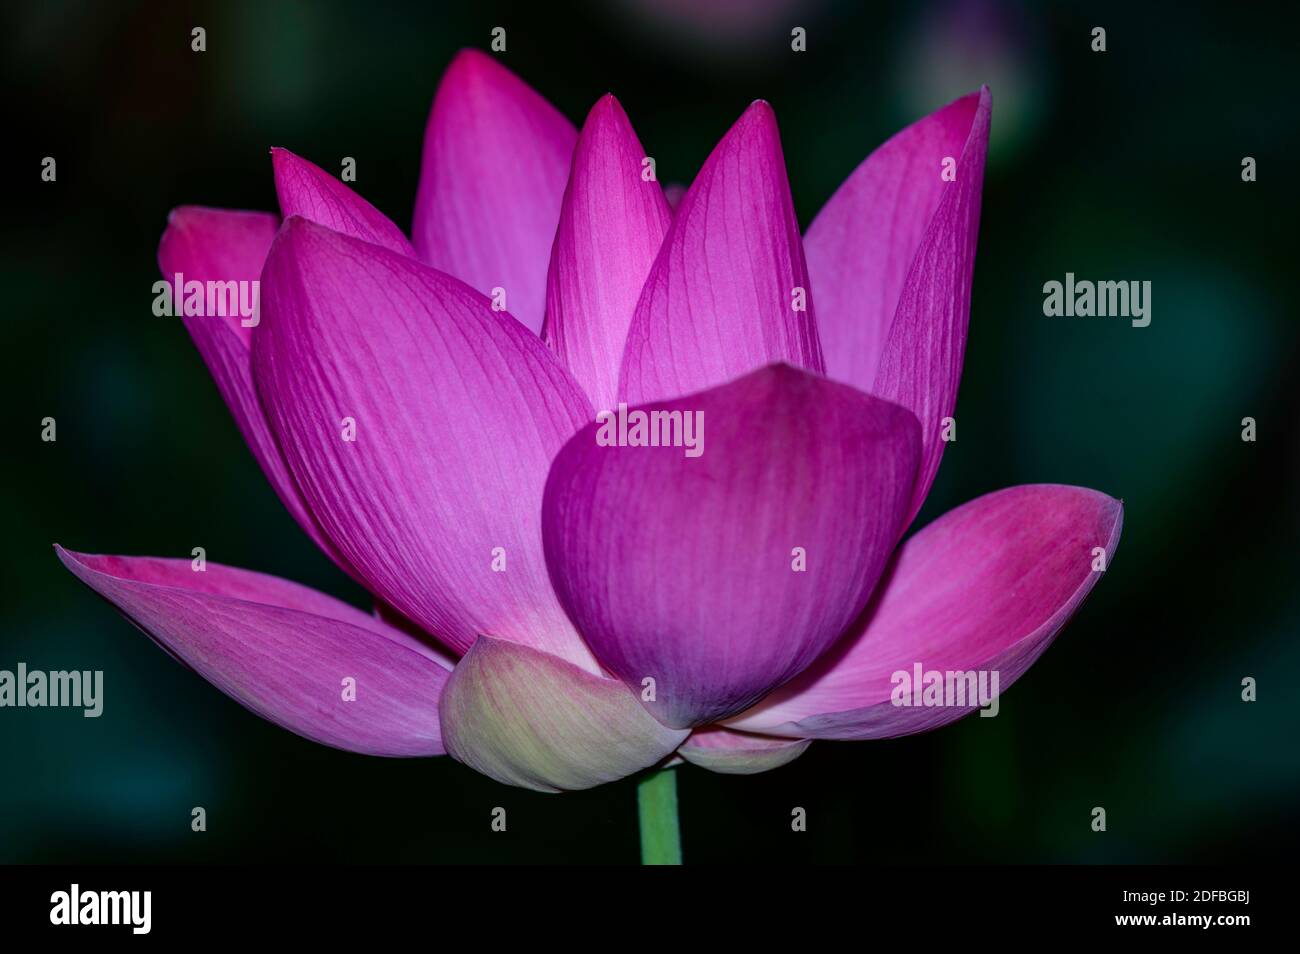 Lotus flowers In various stages of blooming; an Asian beauty, an Asian aphrodisiac Stock Photo